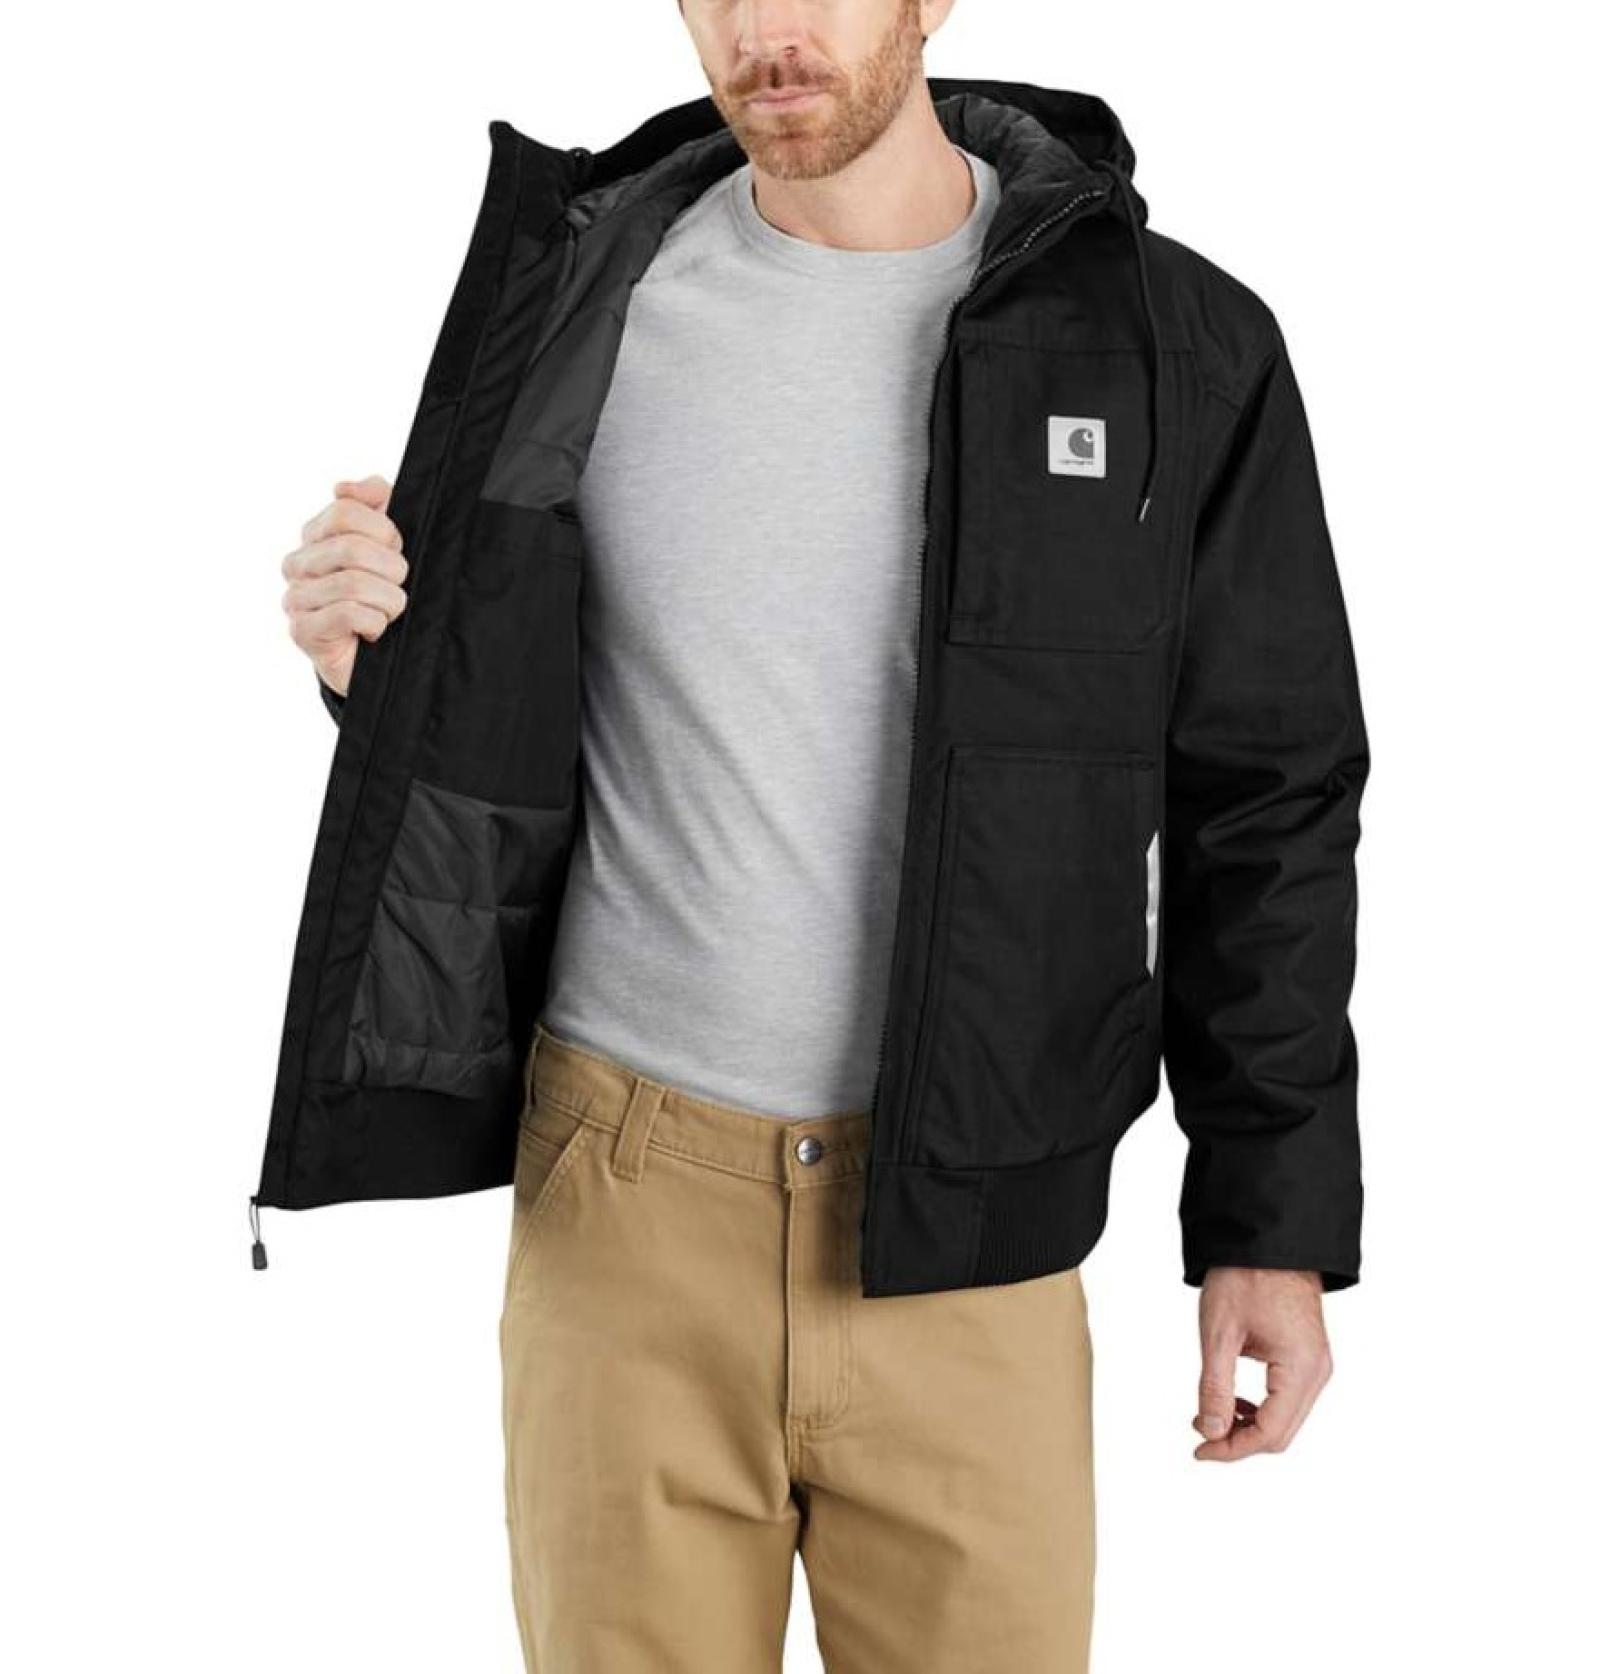 Carhartt Men's Yukon Extremes Insulated Active Jac Right Side Open